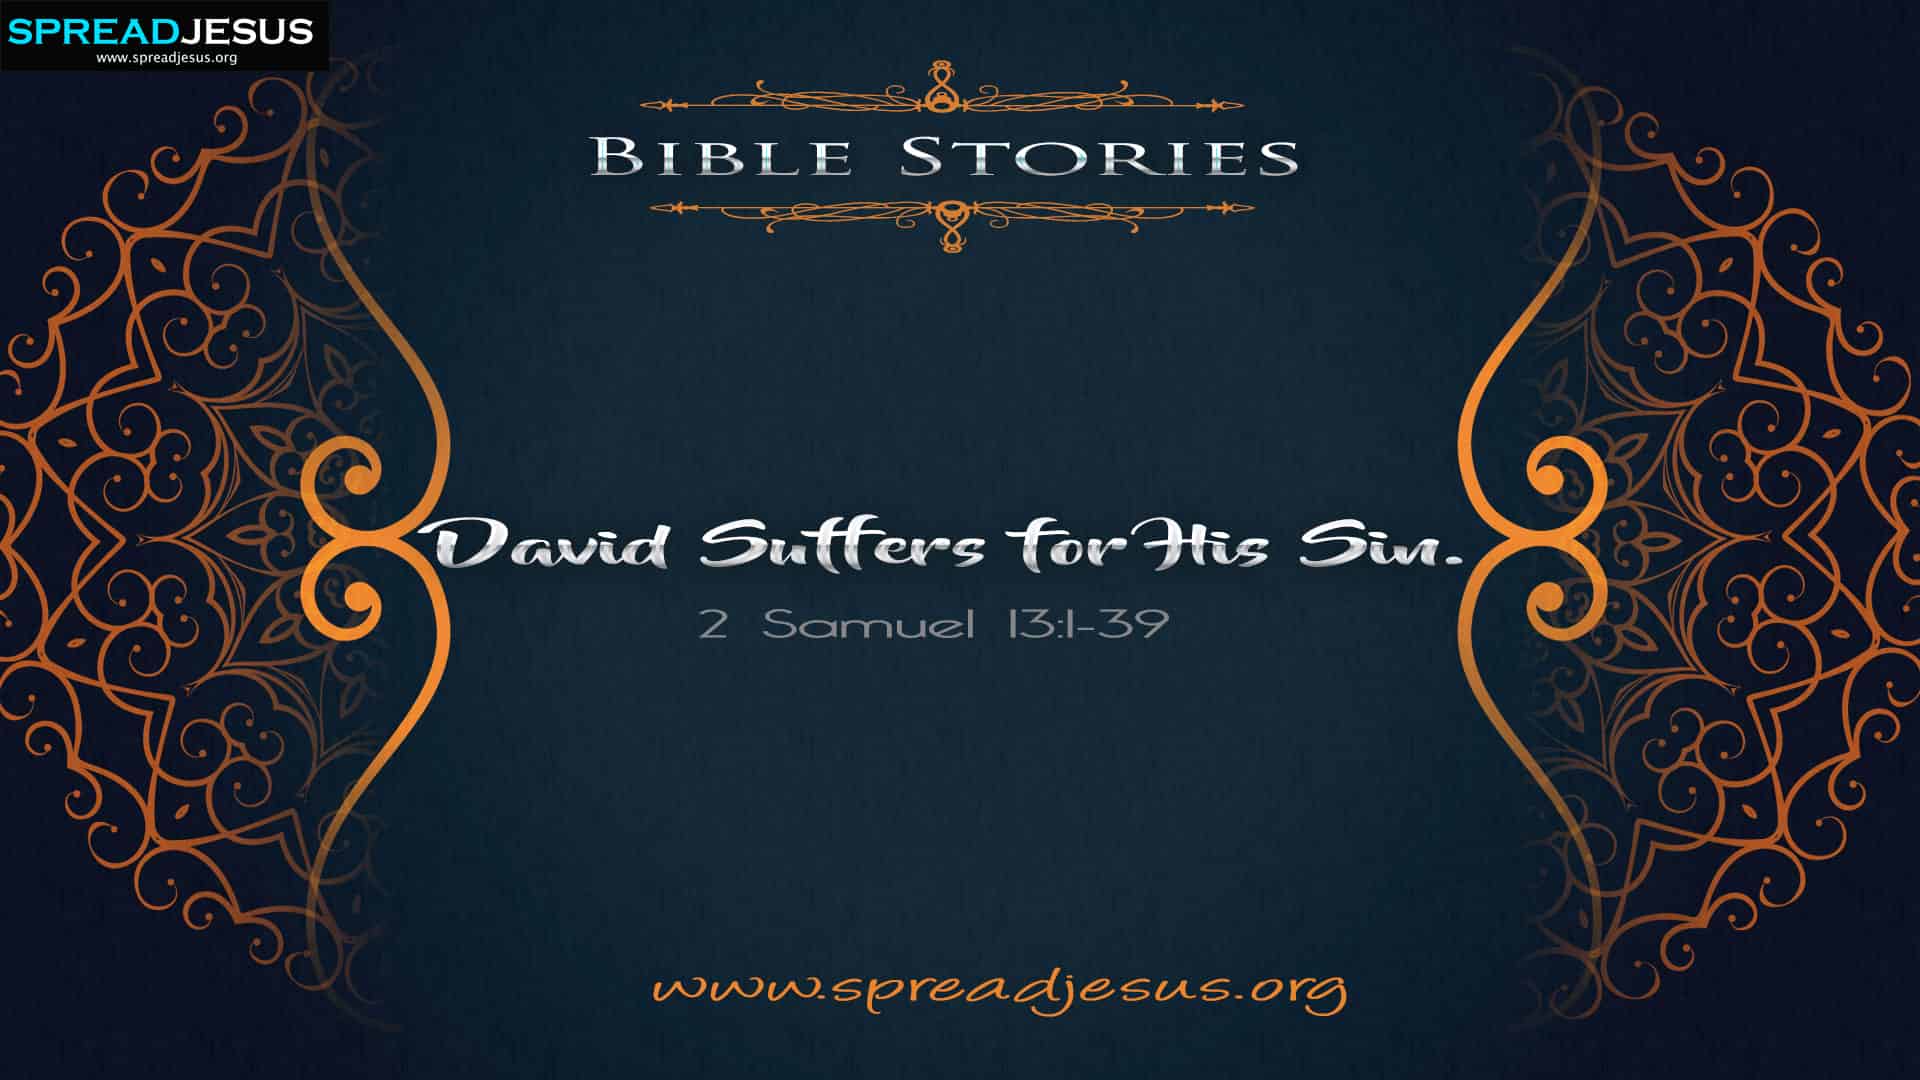 David's Suffering for His Sin: Bible Story from 2 Samuel 13:1-39